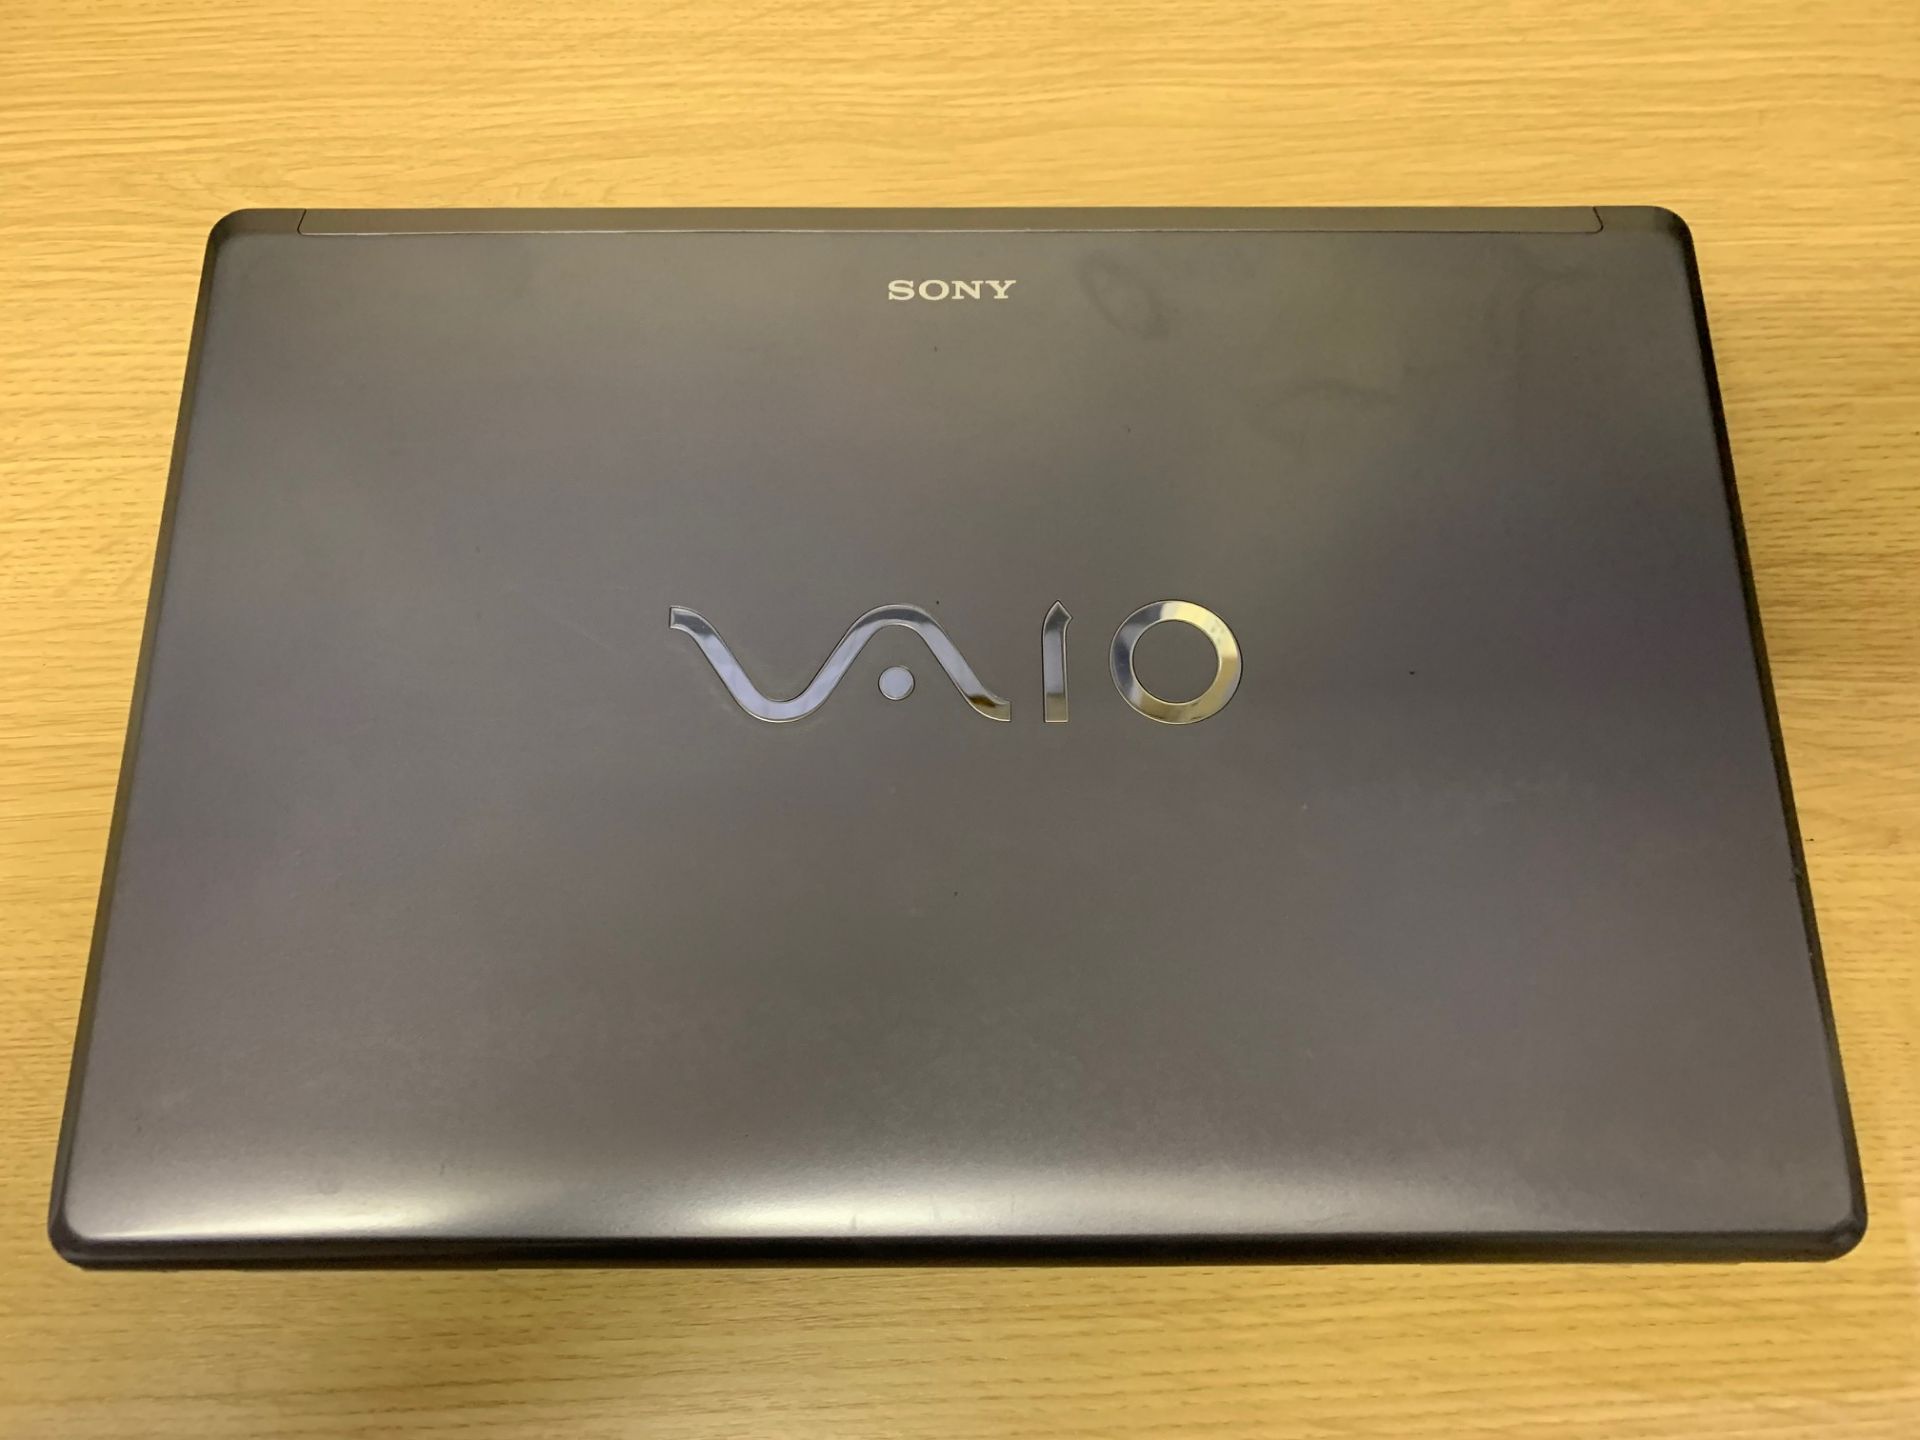 Sony Vaio FW41E Laptop - 320GB Hard Drive, 4GB RAM, 15.6" Screen, Loaded With Windows 7 & Complete - Image 3 of 4